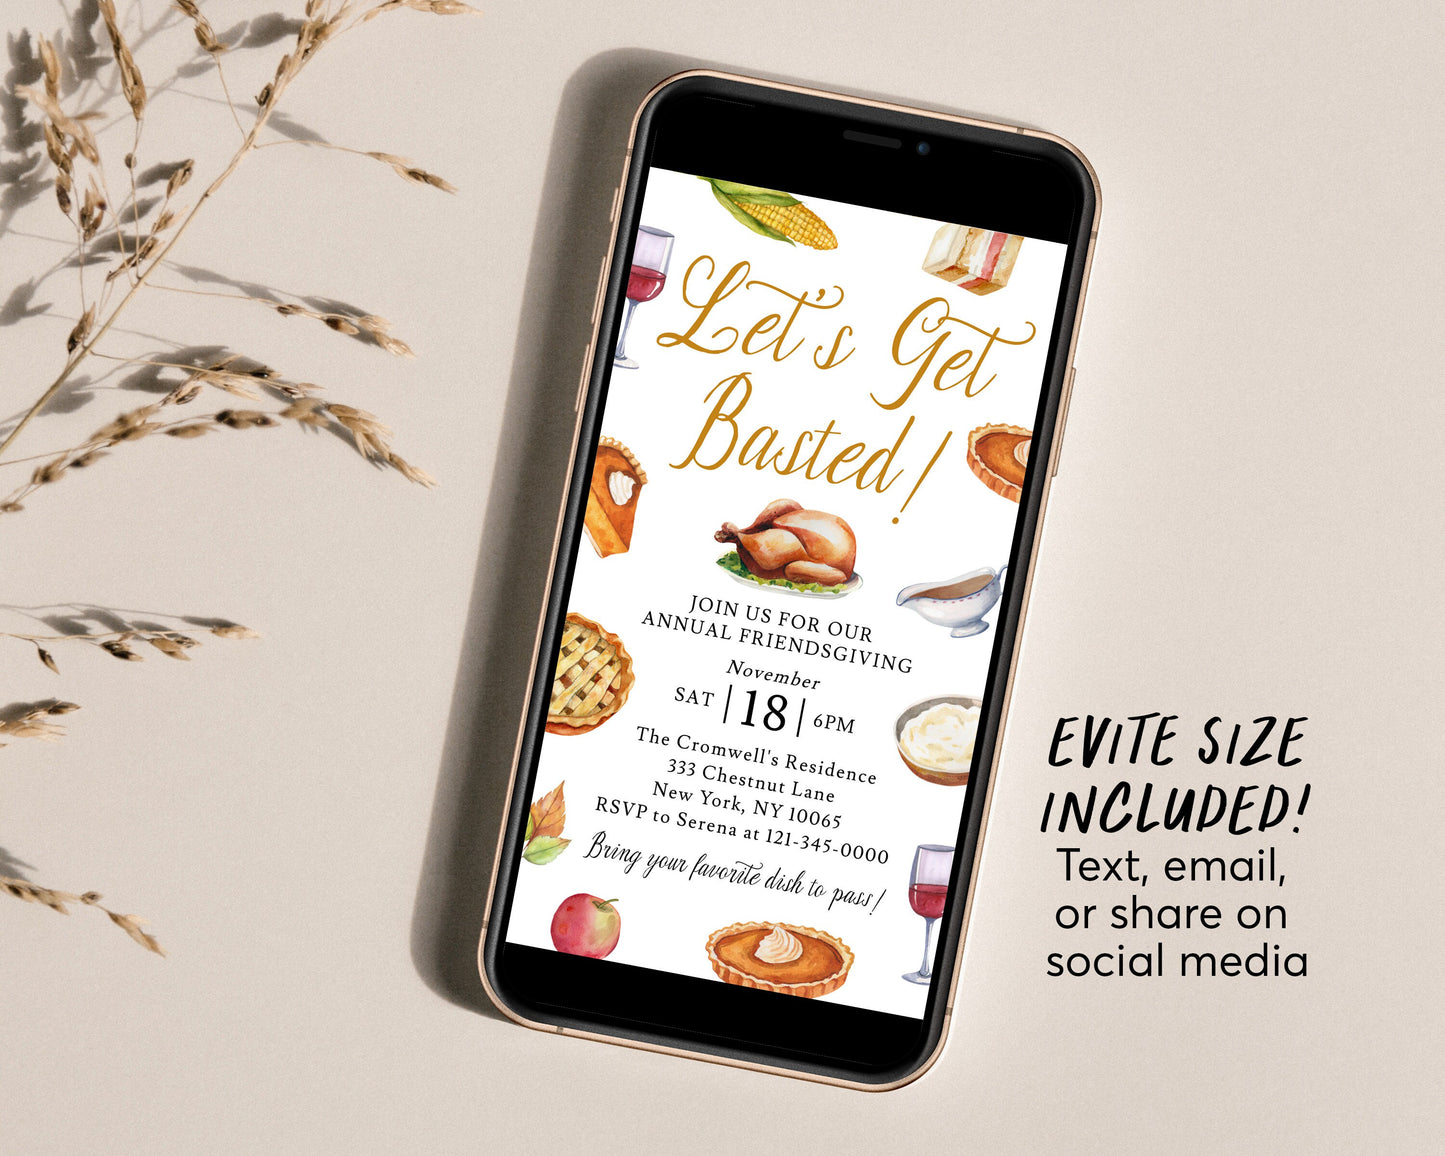 Let's get Basted Thanksgiving Invitation Editable Template, Funny Friendsgiving Dinner Party Potluck Feast Invite, Evite Fall Turkey Pie